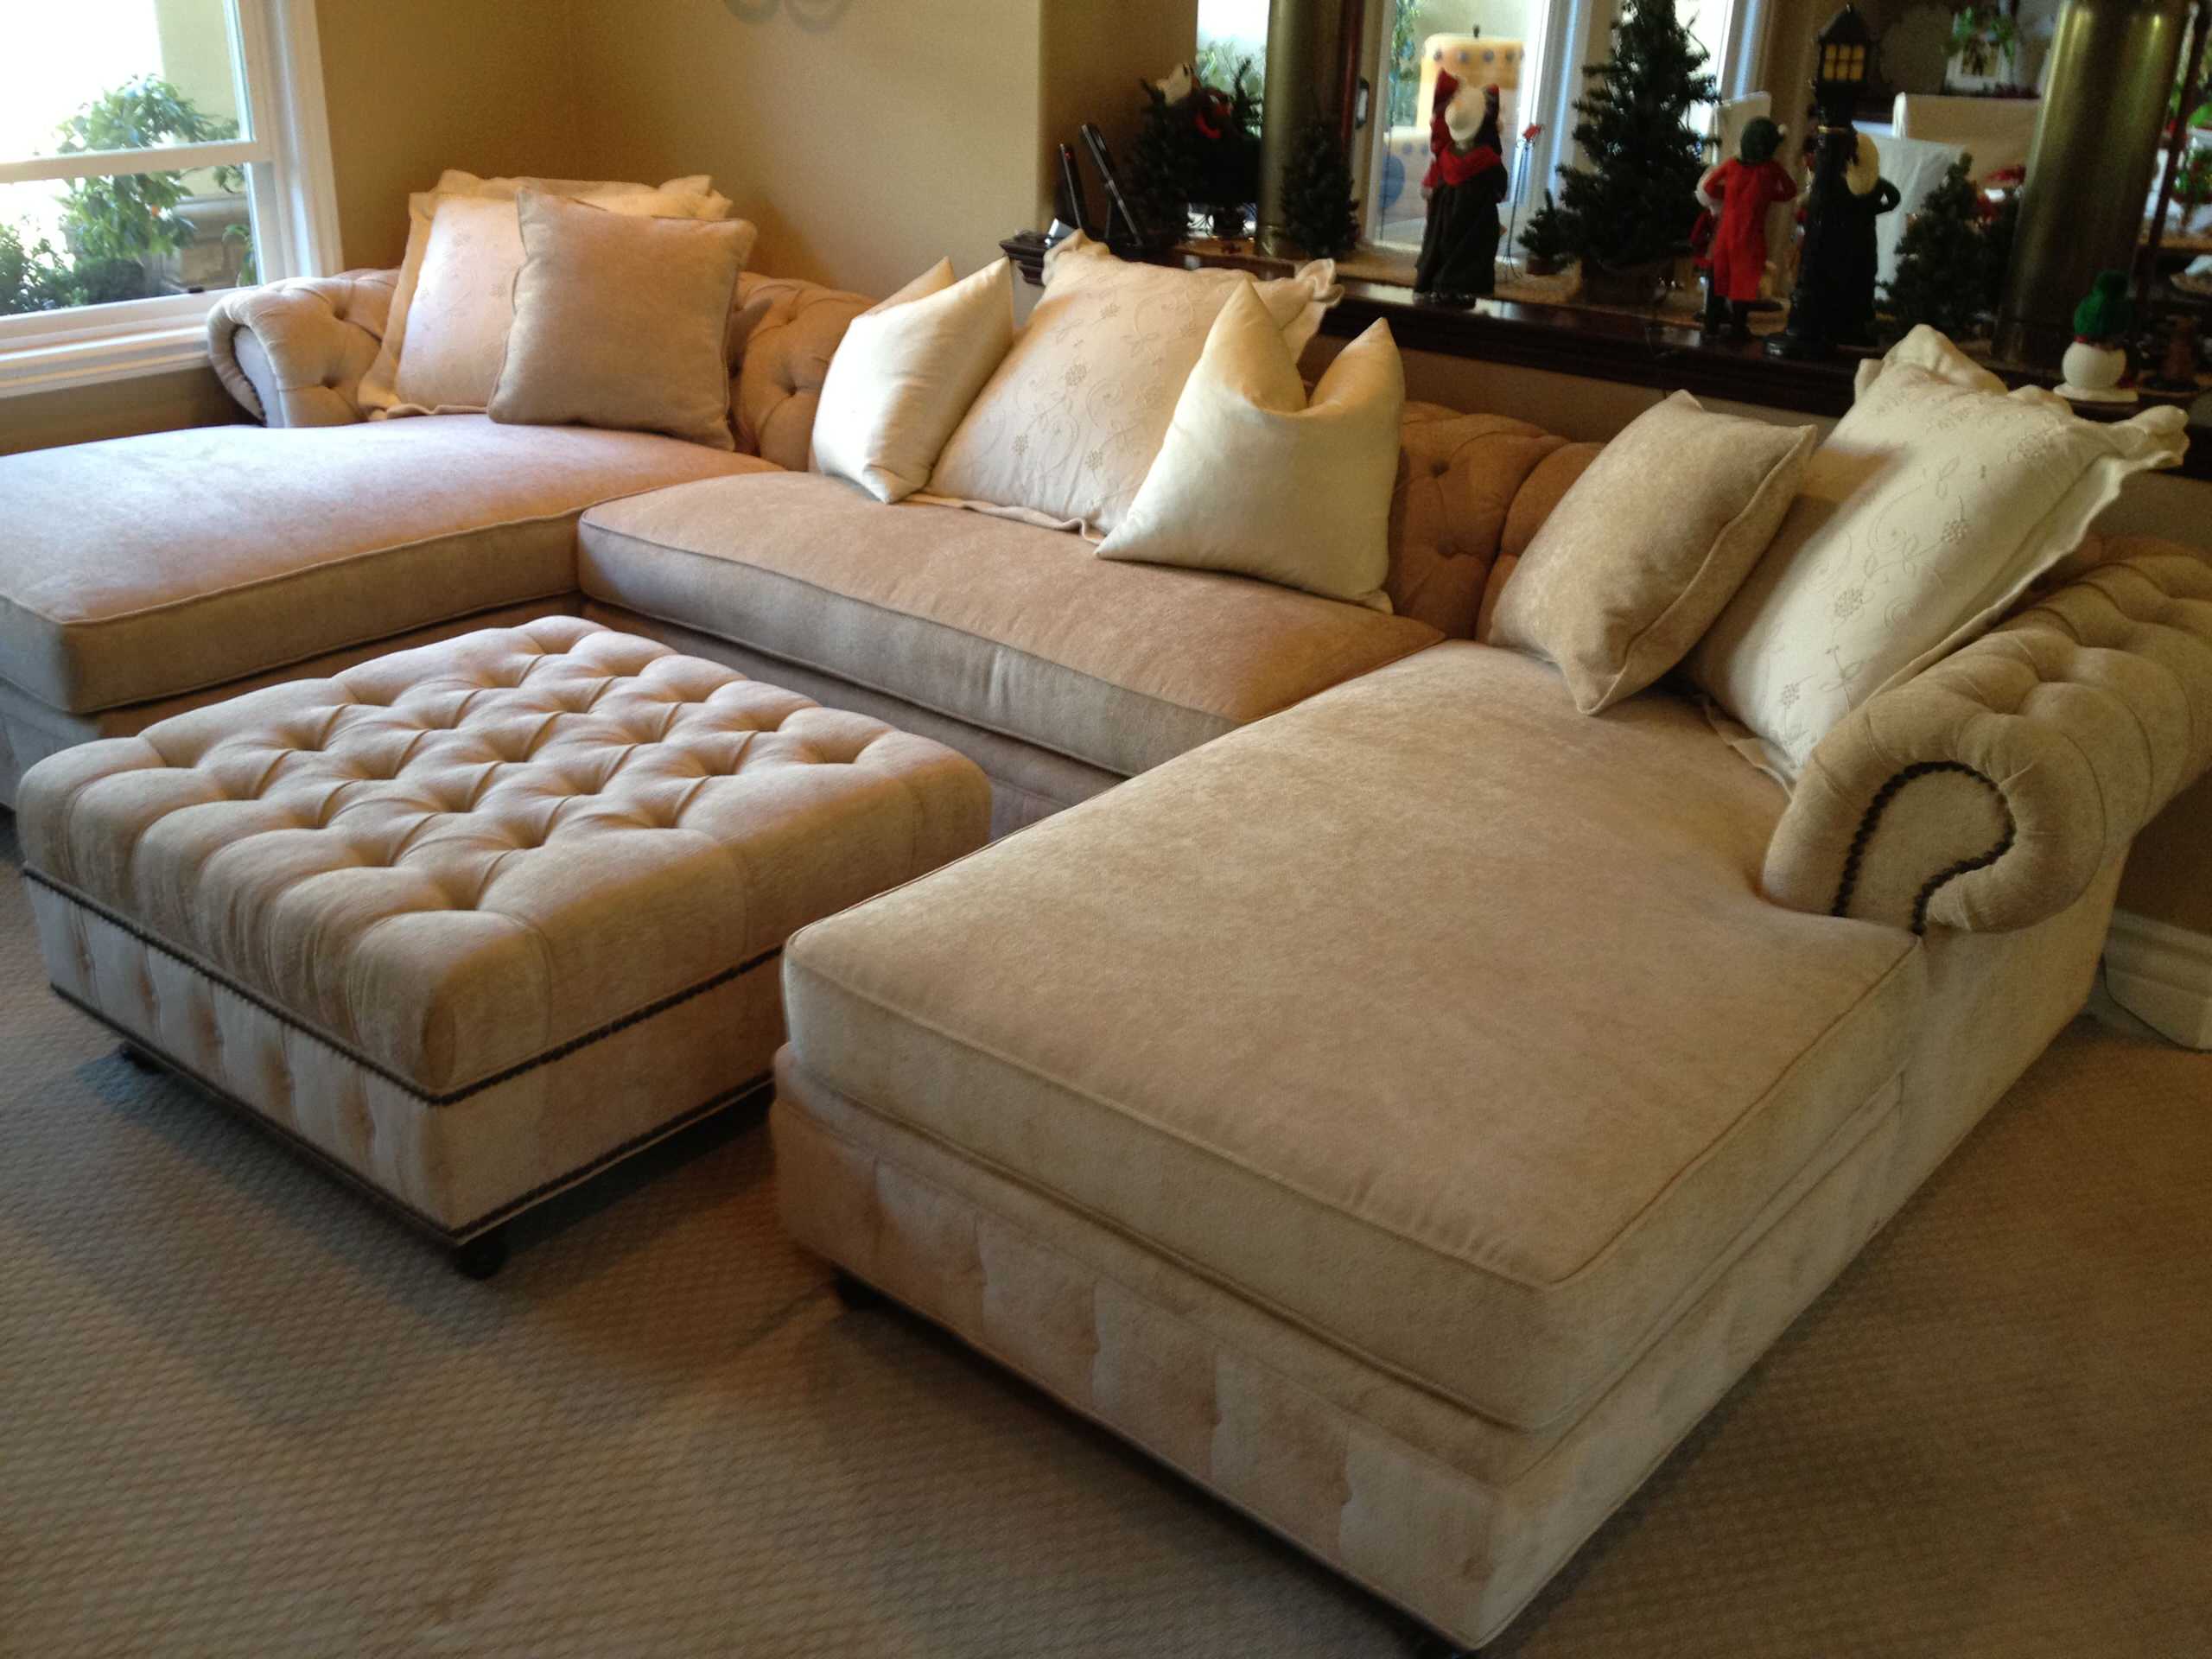 KENZIE STYLE - Chesterfield Custom Sectional Sofas - Traditional - Family  Room - Los Angeles - by Monarch Sofas | Houzz